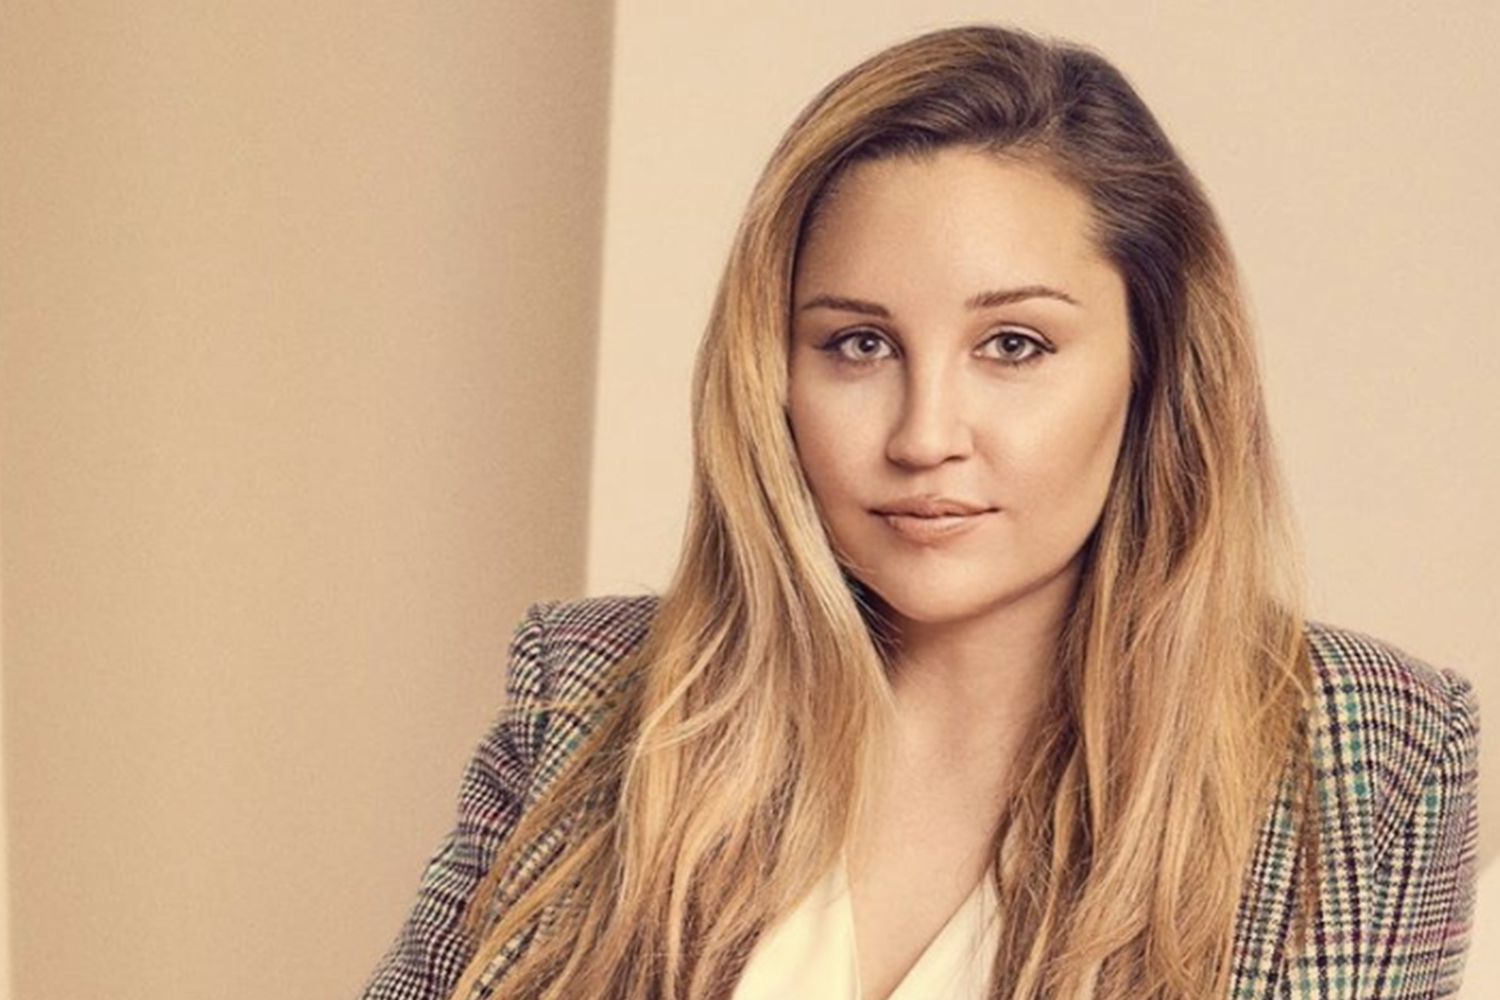 Actress Amanda Bynes interview with Paper Magazine where she discusses